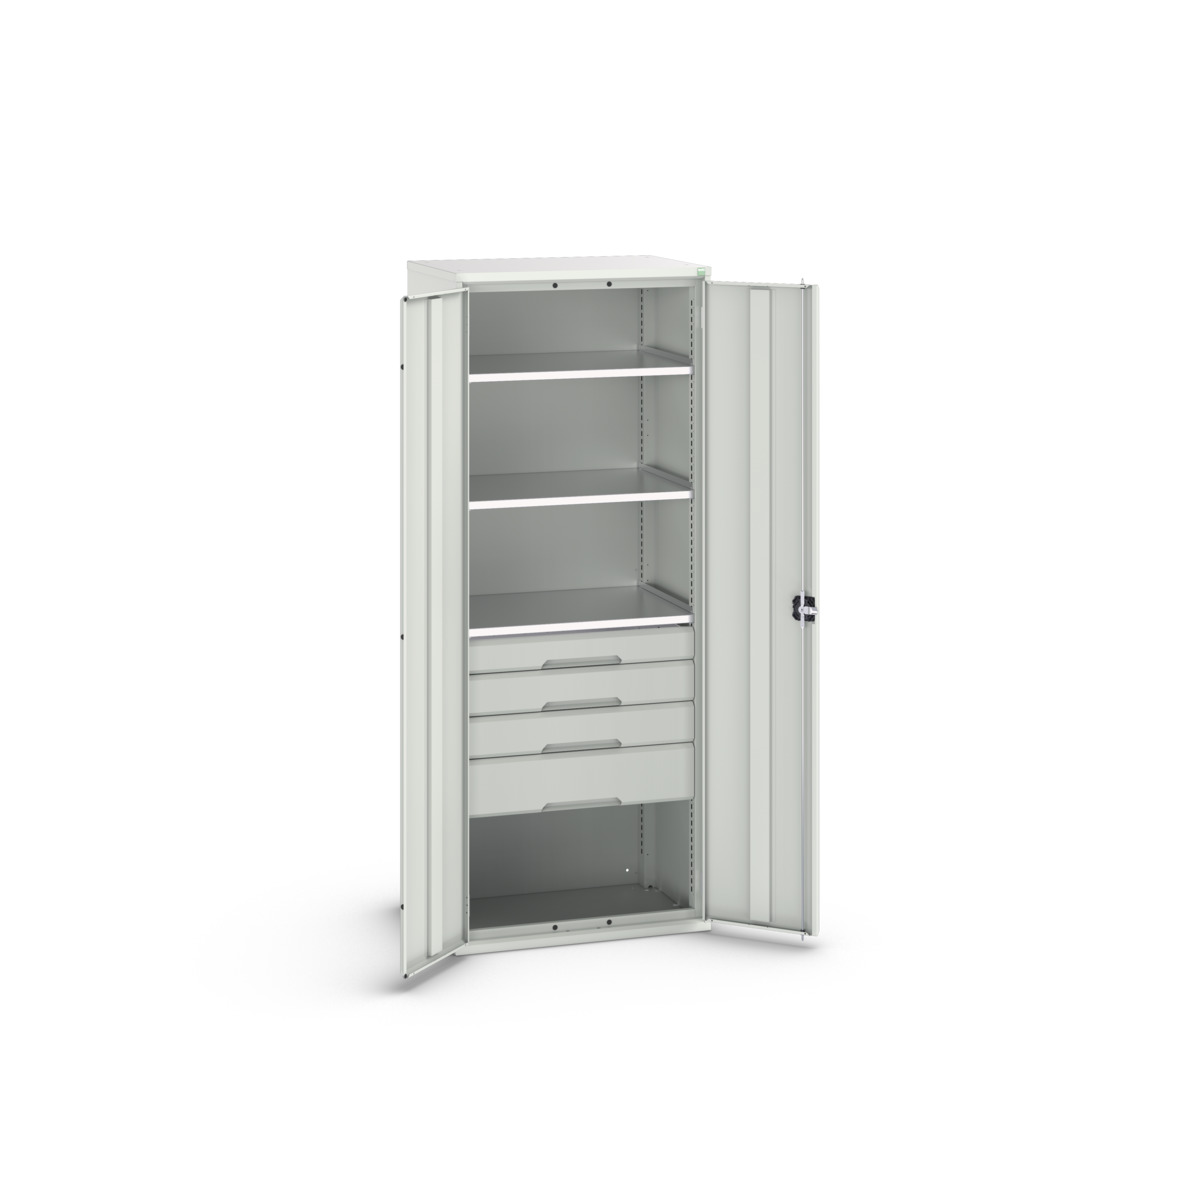 16926457.16 - verso kitted cupboard